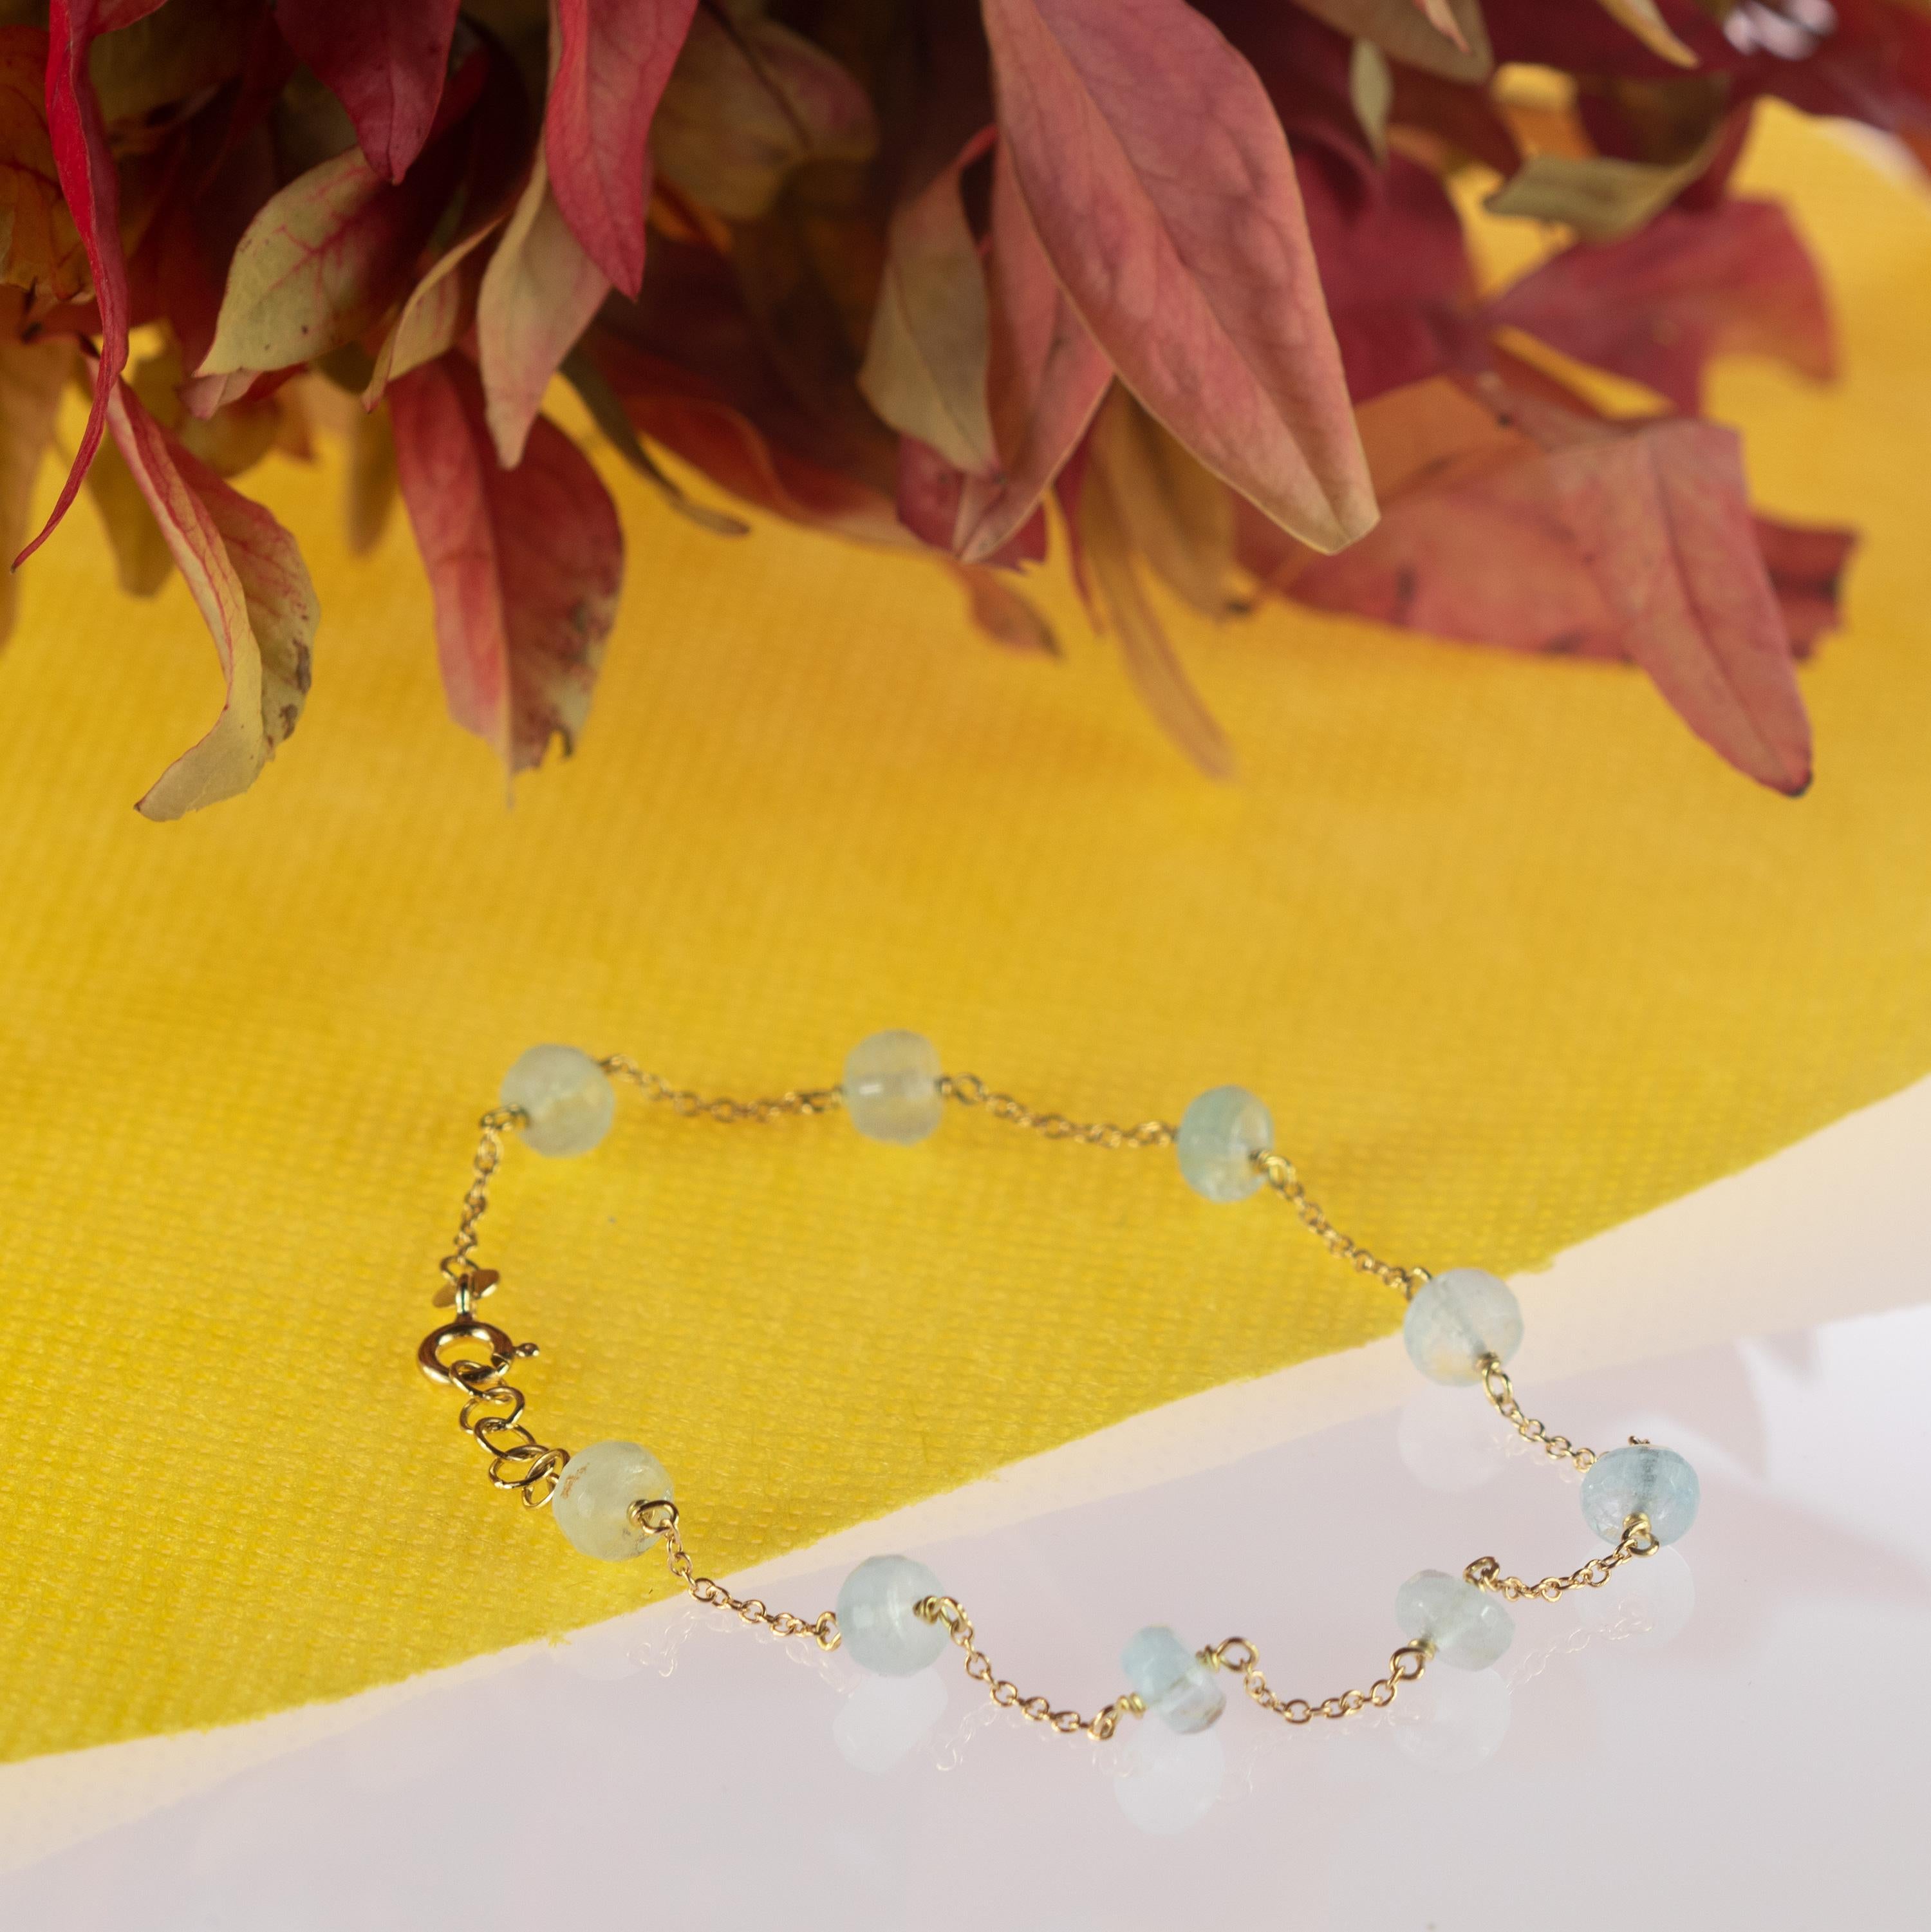 Intini Jewels signature quality on a modern and contemporary design jewel. Nine gems of top quality of aquamarine embellish a delicate Gold Plate chain bracelet.

An elegant touch of glamour at your fingertips. Let yourself be tempted by a chic and